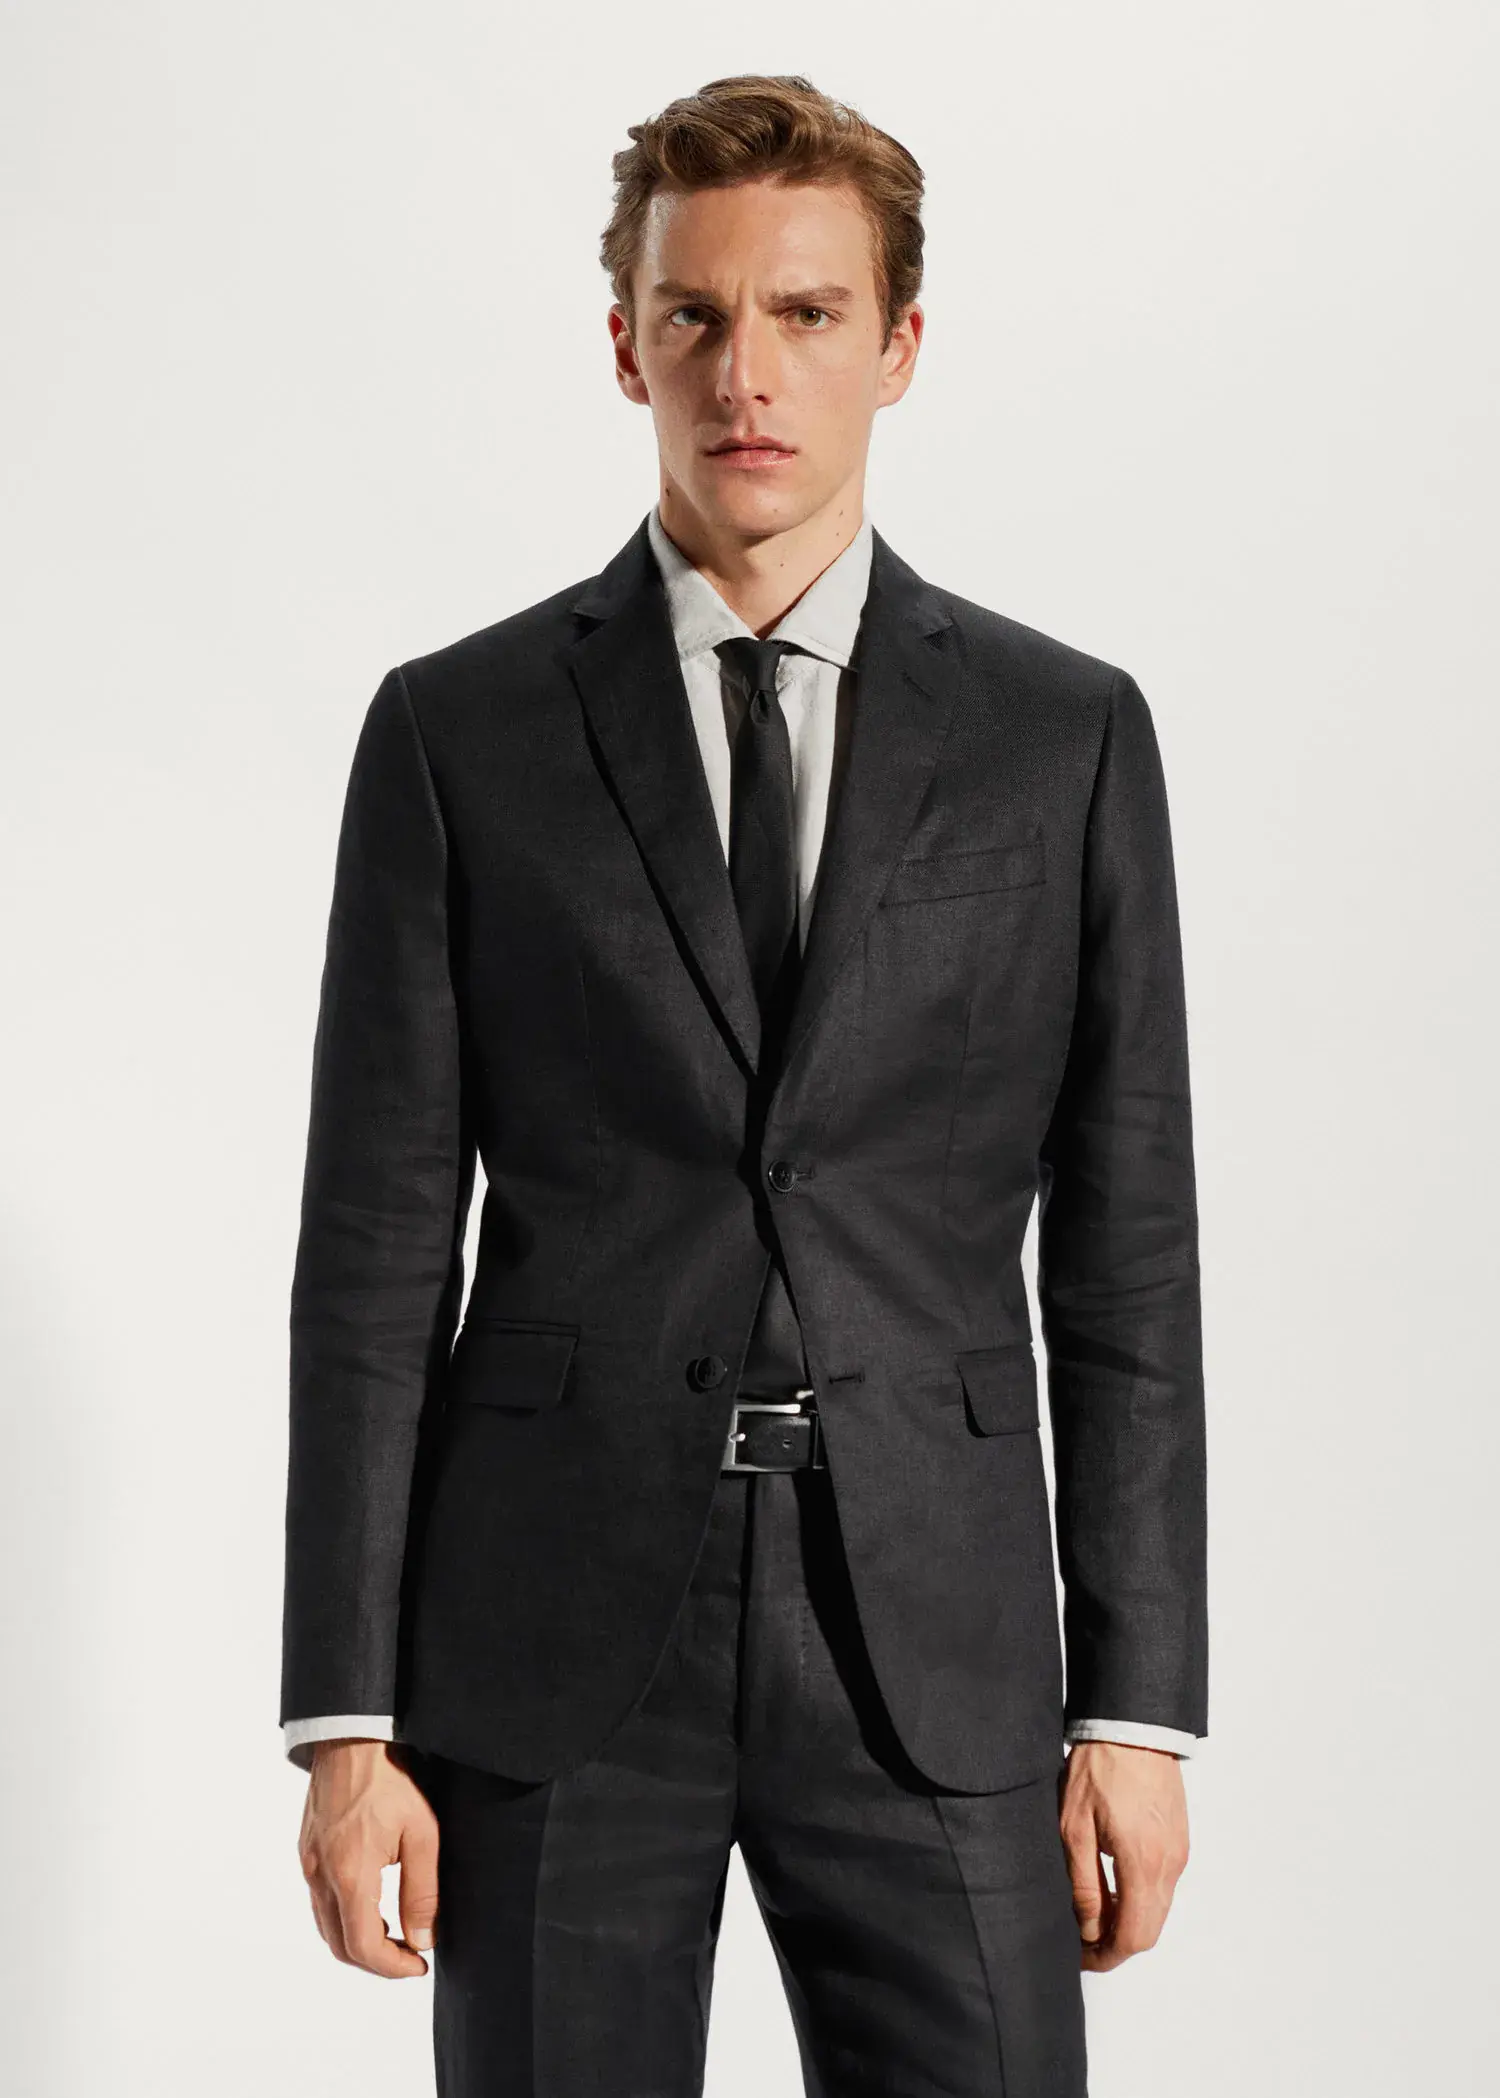 Mango Blazer suit 100% linen. a man wearing a suit and tie standing in front of a white wall. 